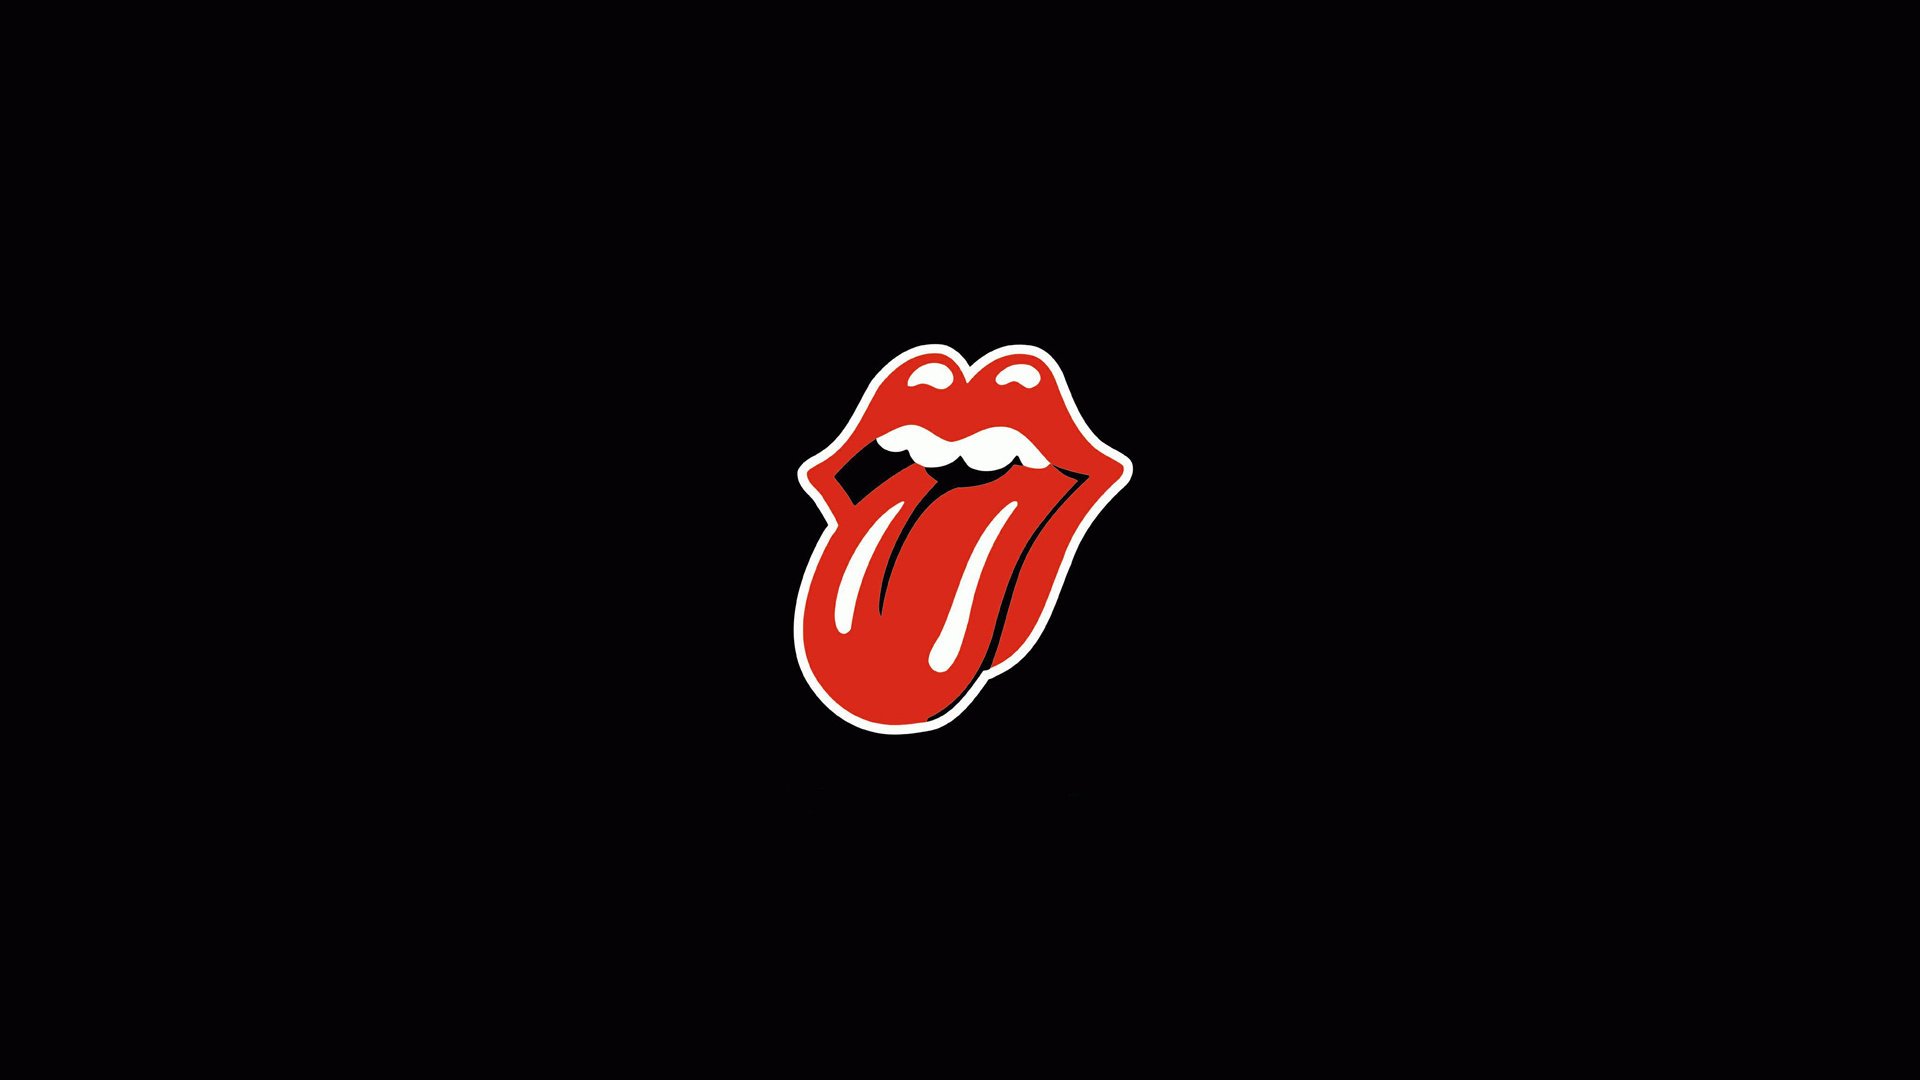 The Rolling Stones HD wallpaper The Rolling Stones wallpapers